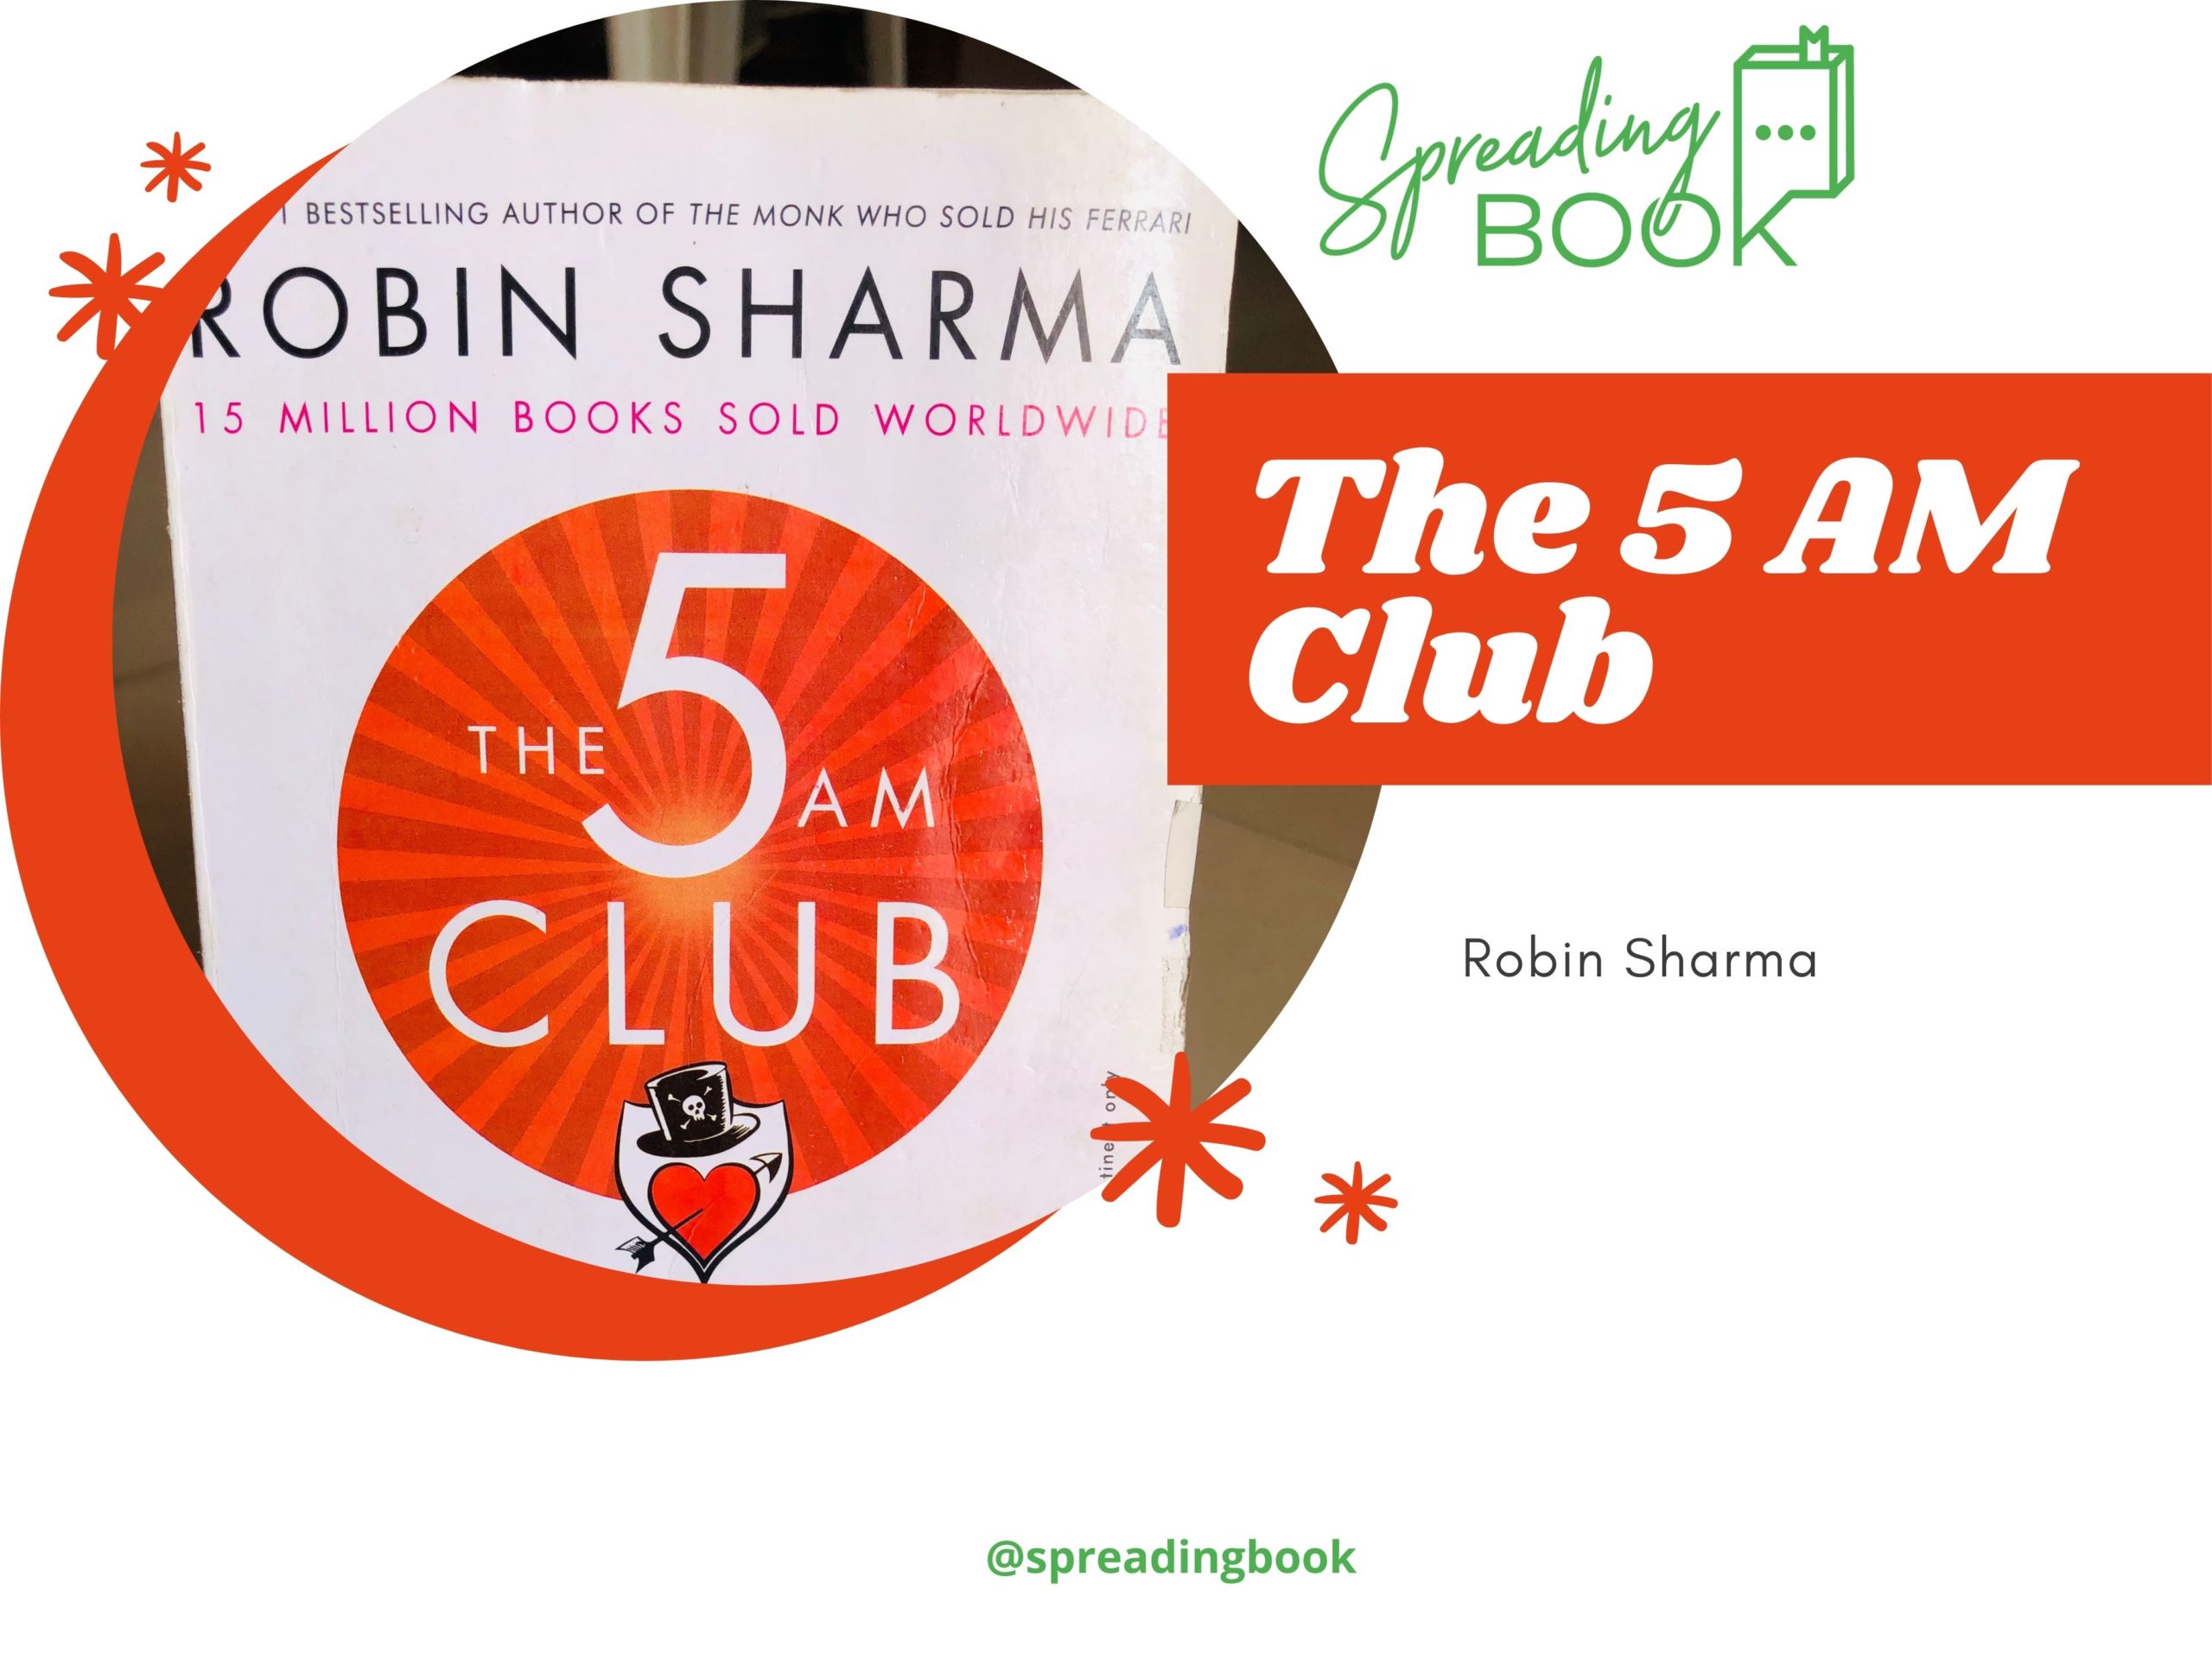 Book Quotes - Featured Image(The 5 AM Club by Robin Sharma)